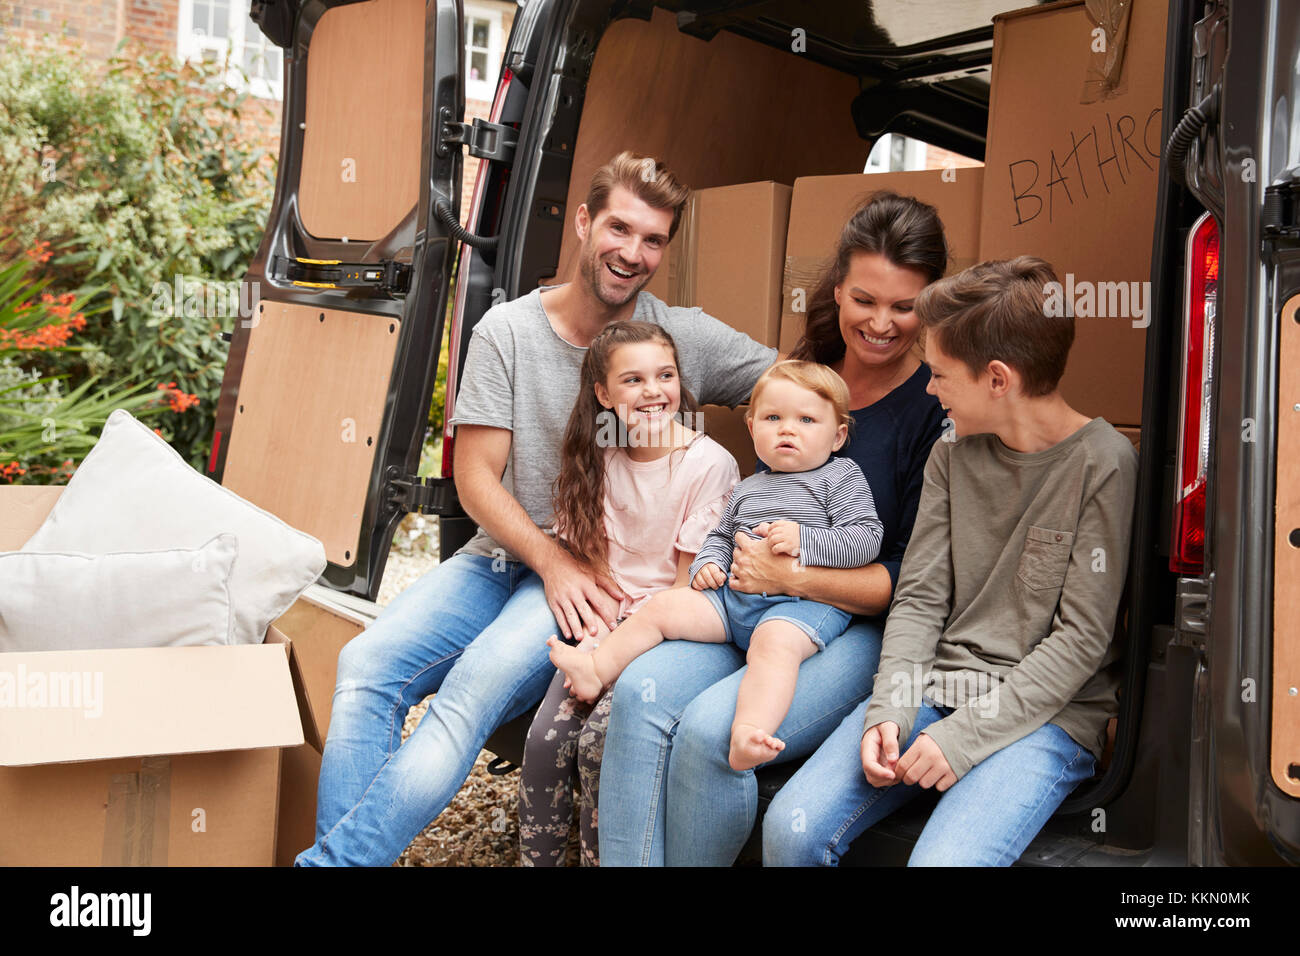 Family Sitting In Back Of Removal Truck On Moving Day Stock Photo